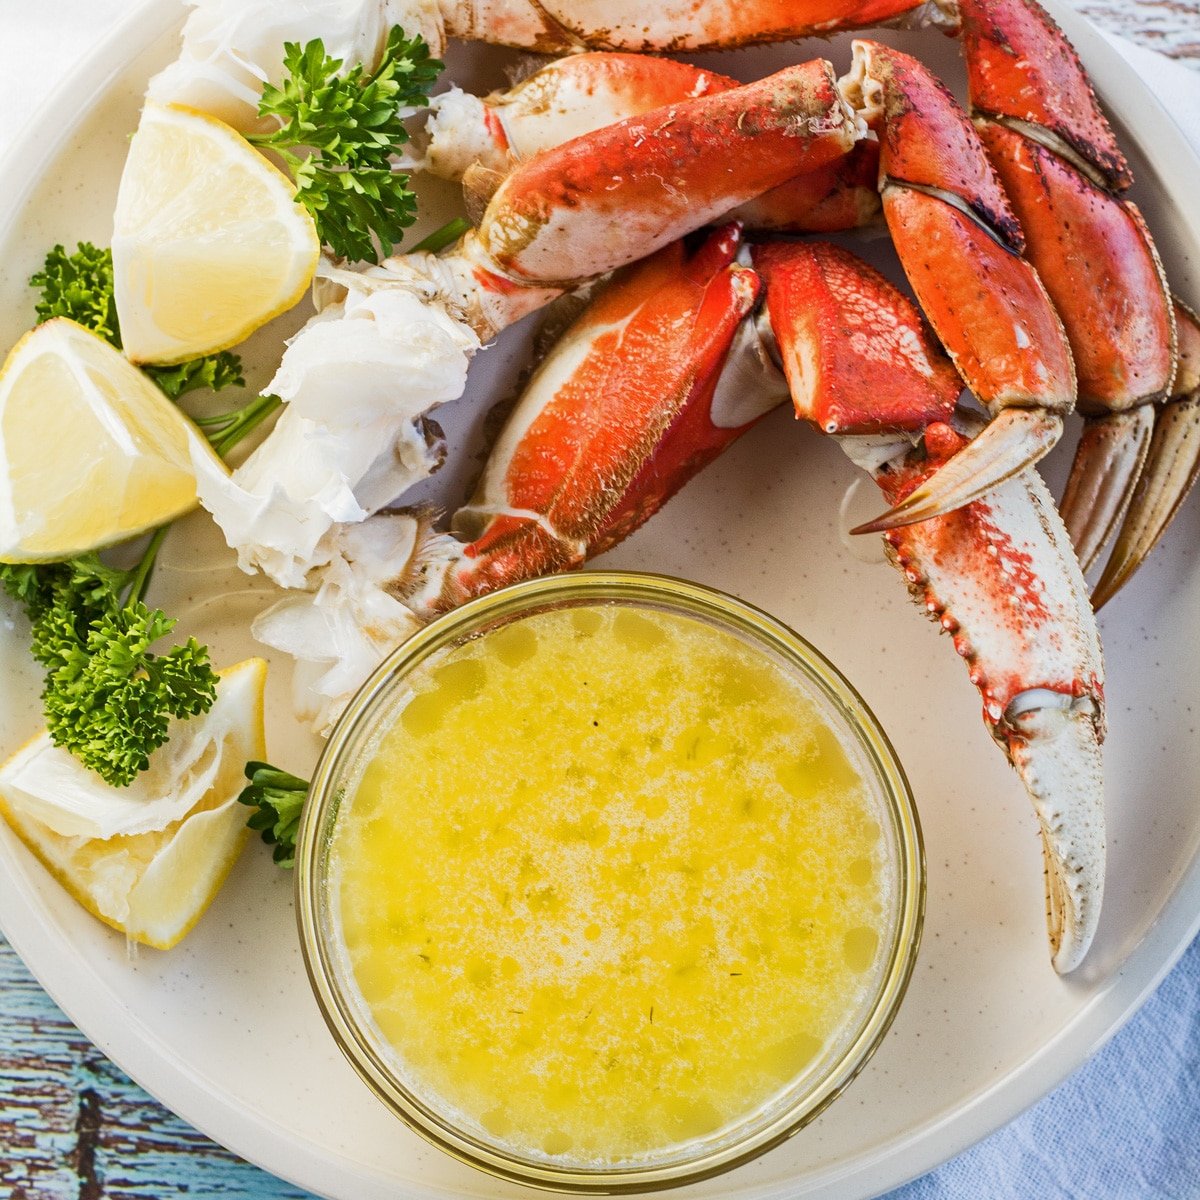 Aquare image of crab legs on a plate with butter.